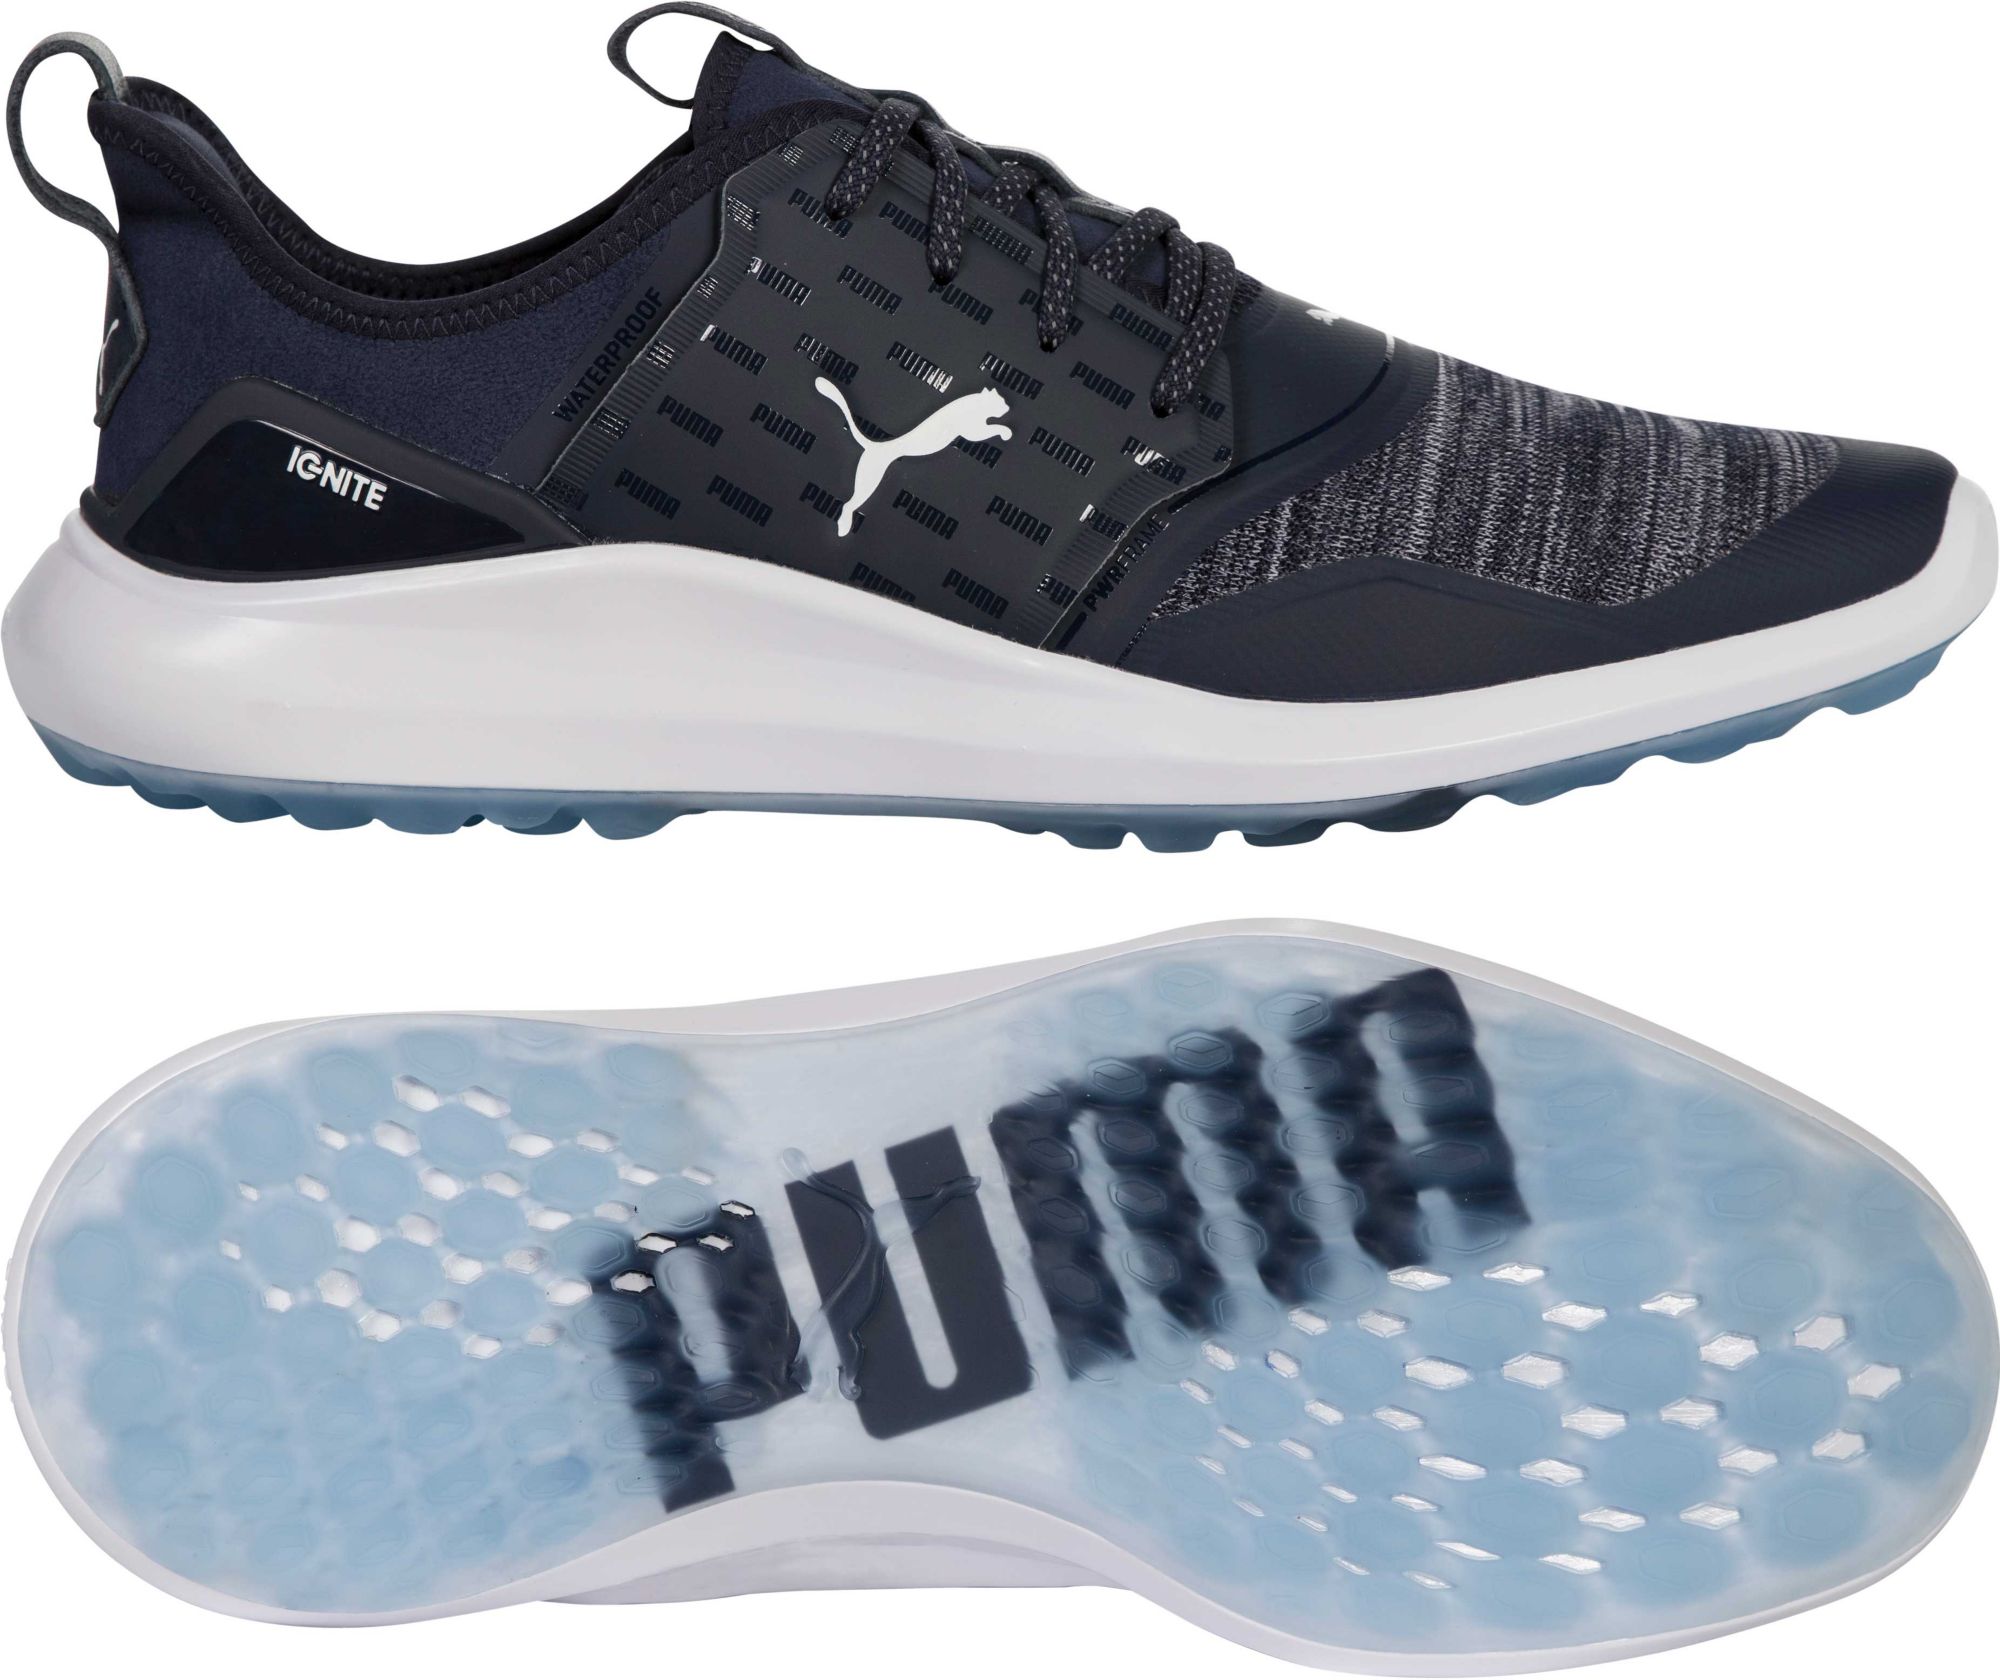 puma support shoes